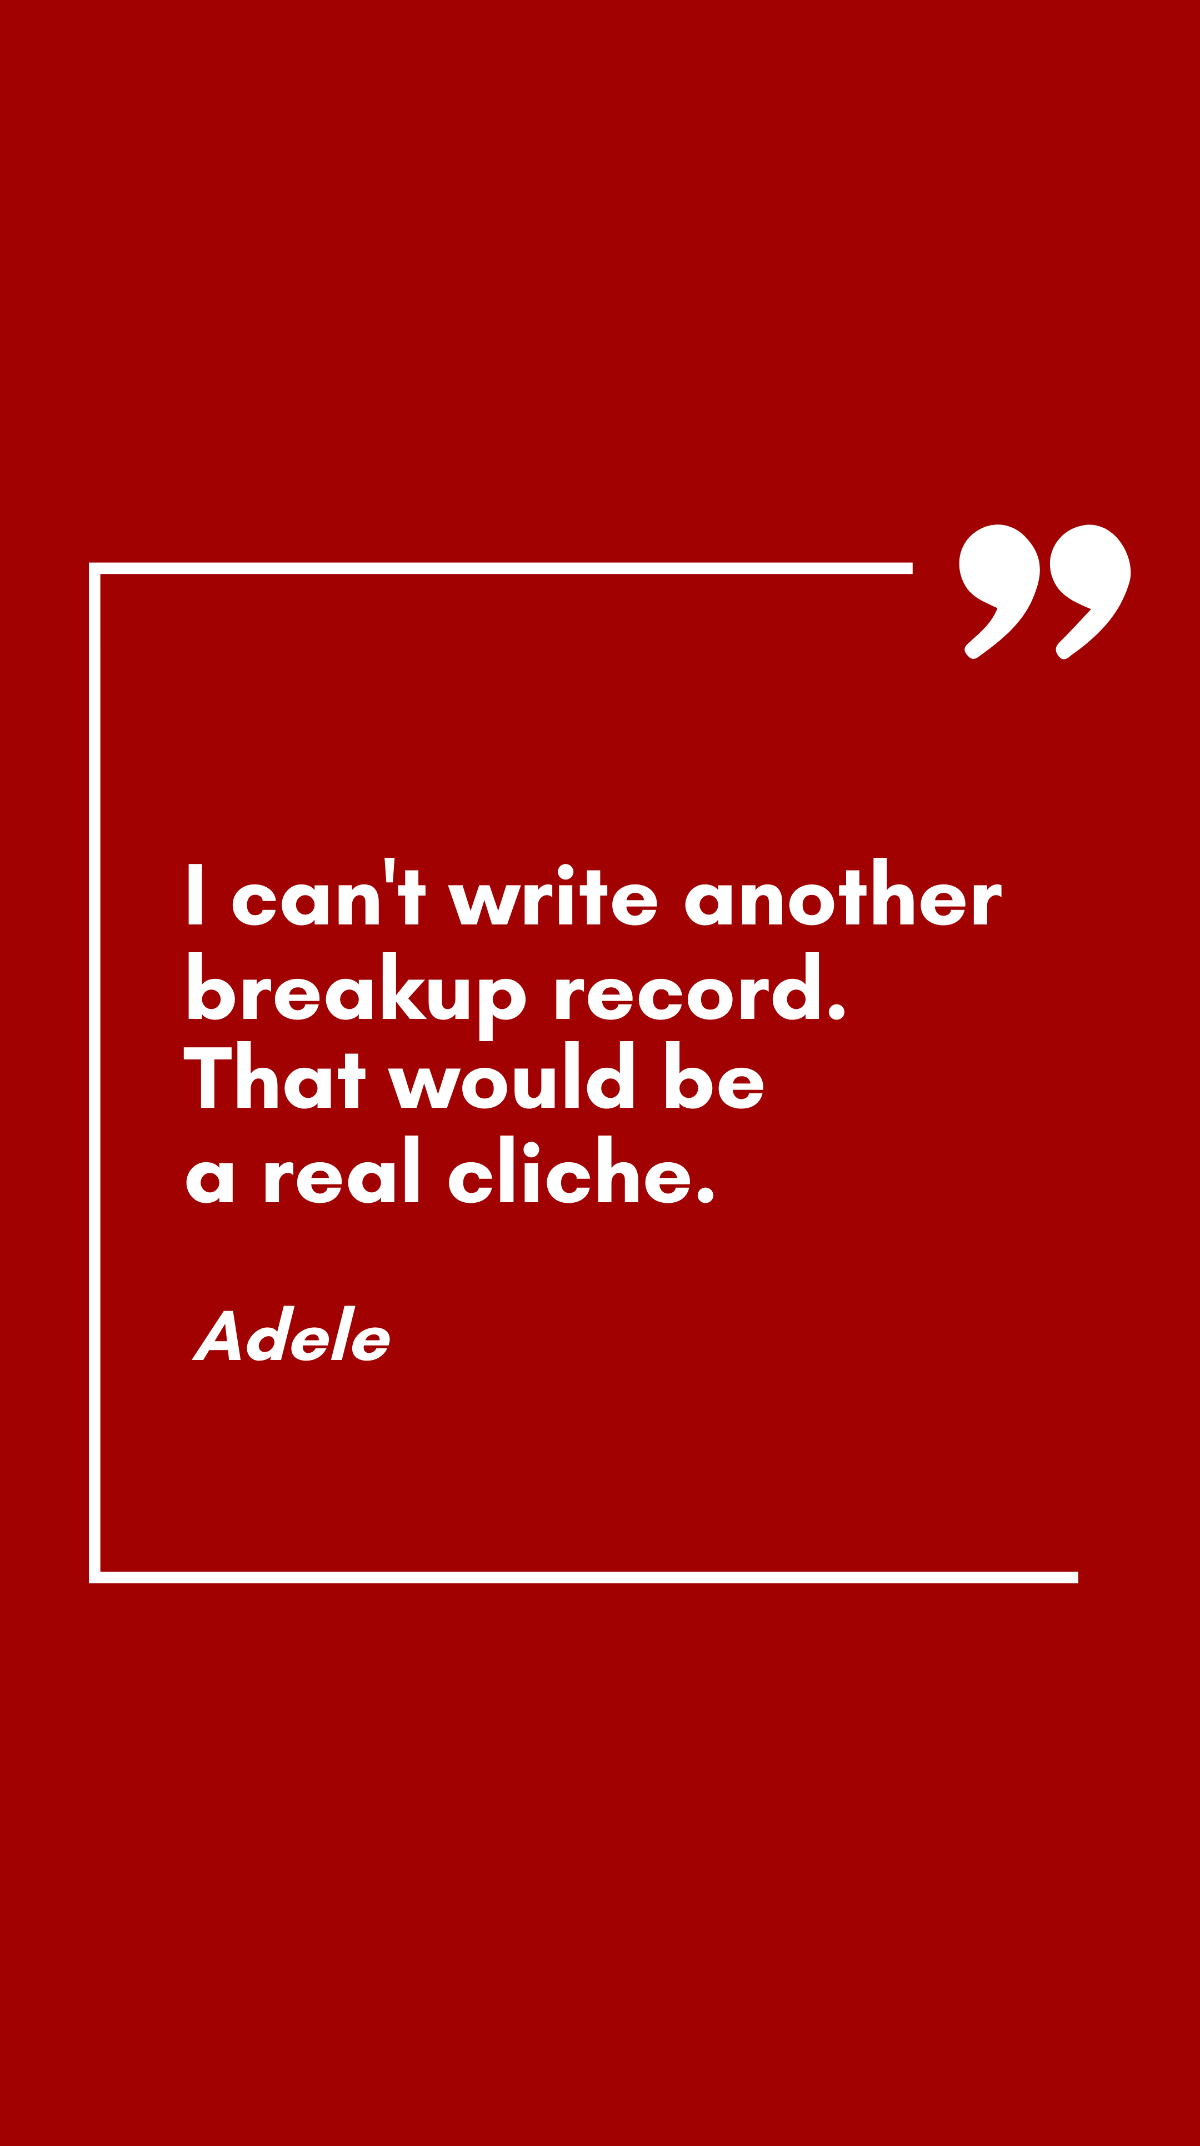 Adele - I can't write another breakup record. That would be a real cliche. Template